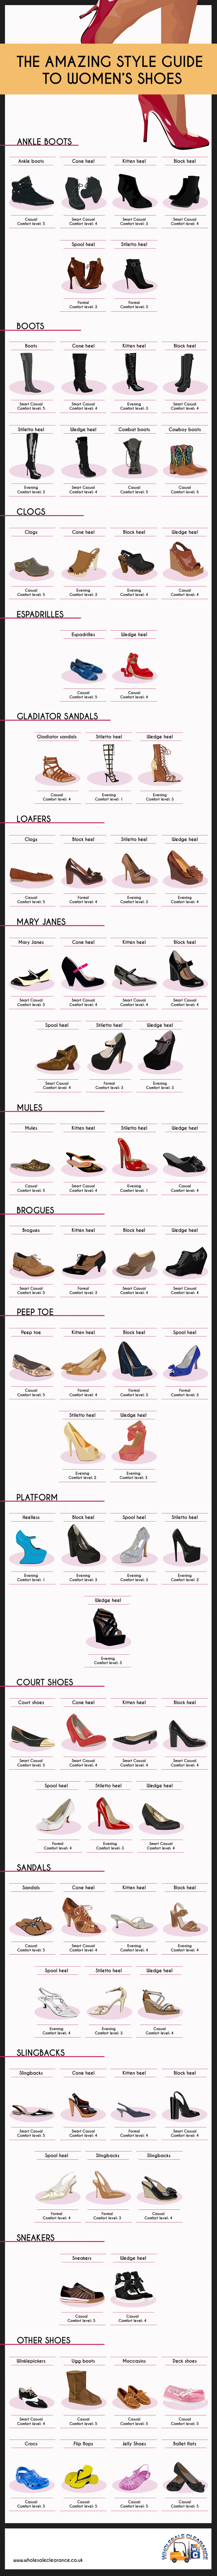 Comfort Level Guide to Women Shoes - Fashion Infographic